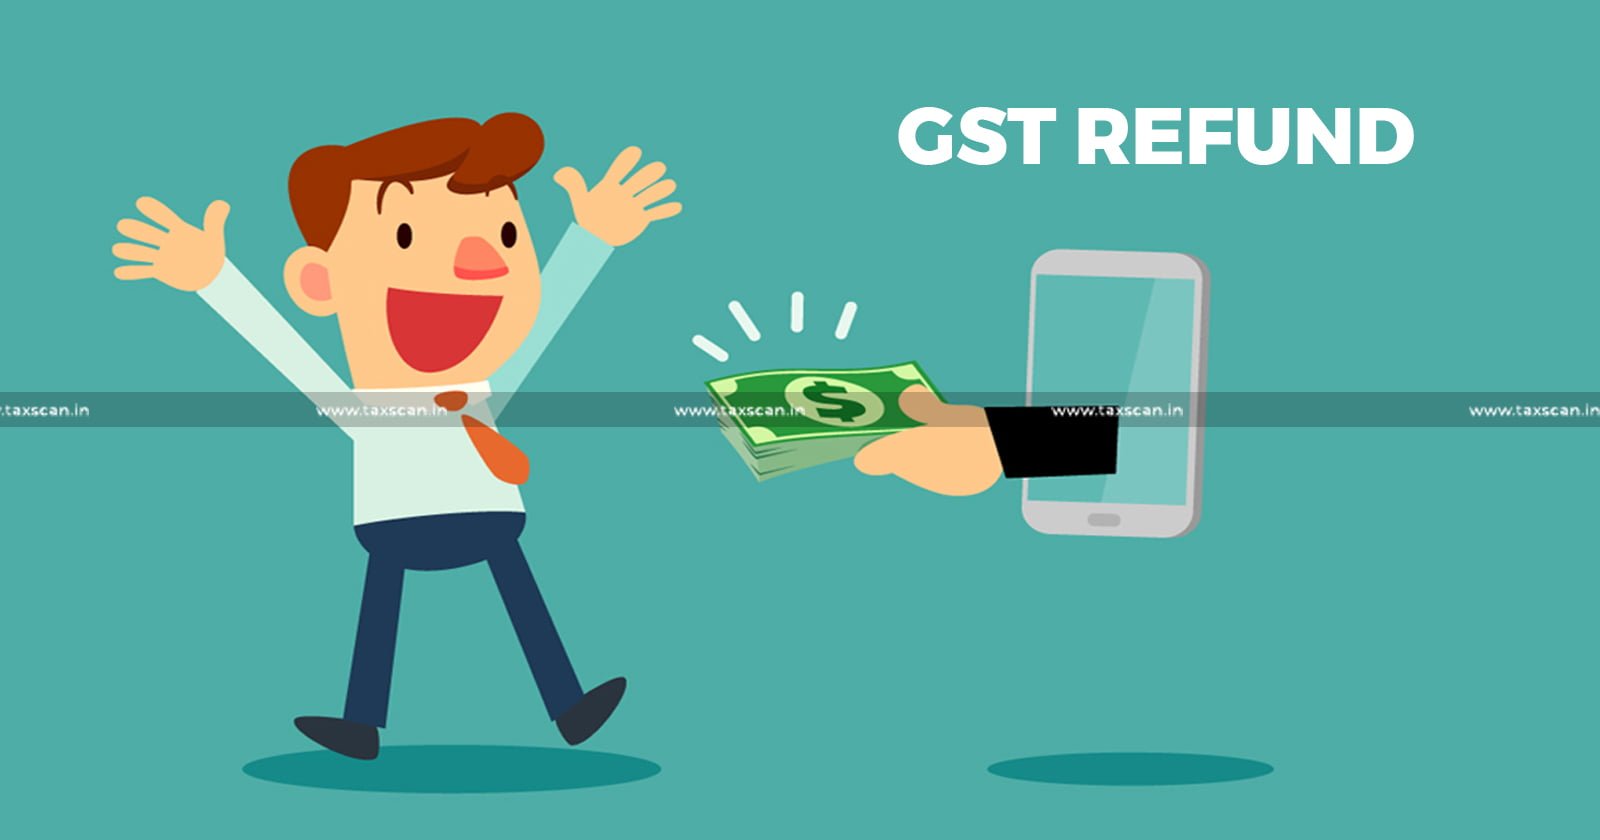 Alleged Forced GST Recovery - GST Recovery - Calcutta HC - GST Refund - Calcutta HC directs Assessee to Apply for GST Refund - taxscan